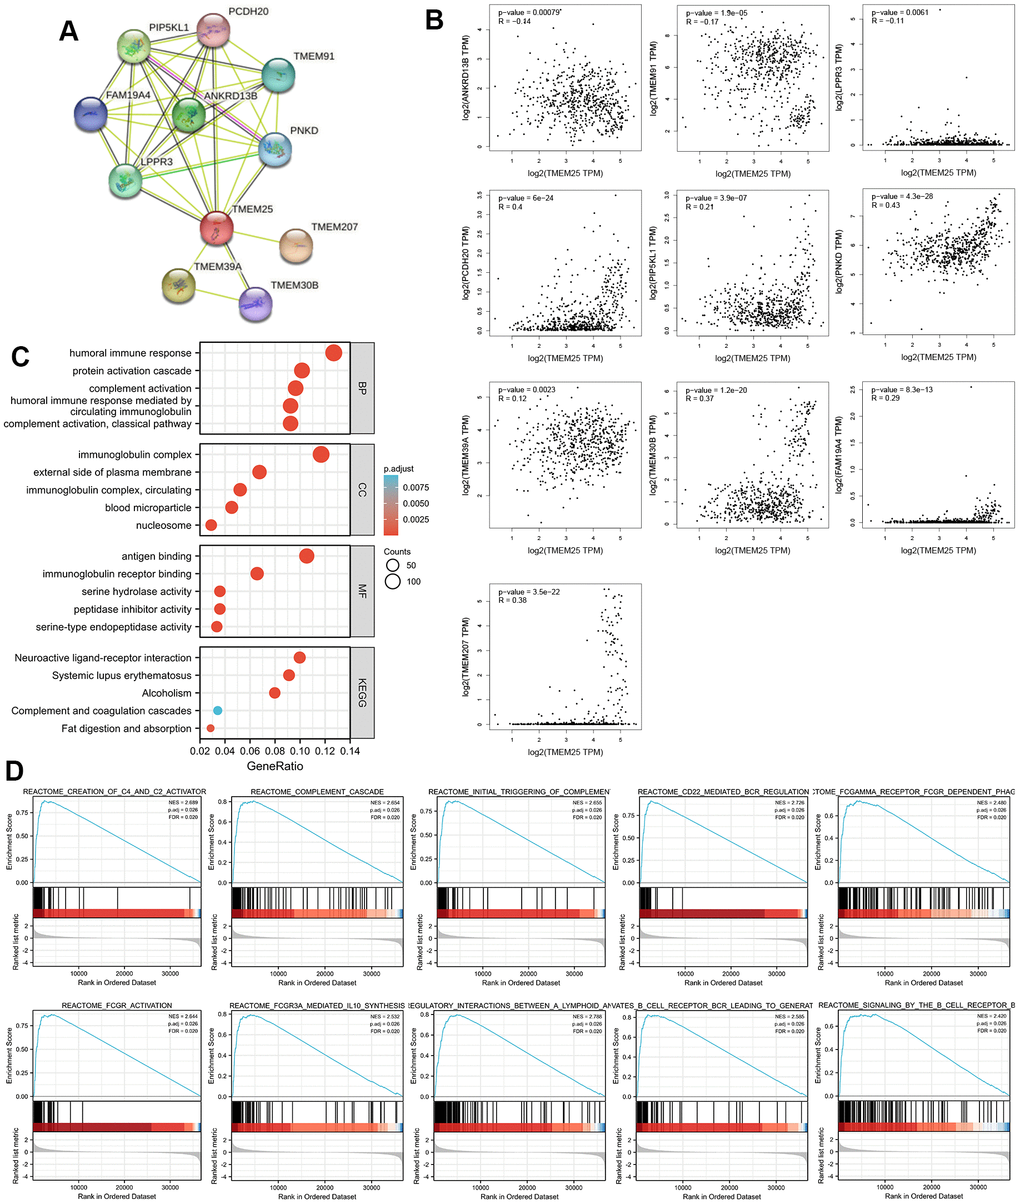 Enrichment analysis of the potential functions played by TMEM25 in ccRCC. (A) The STRING website analyzes and maps protein-protein interaction networks of genes that have some association with TMEM25. (B) The GEPIA2 website further analyzed the correlation of TMEM25 with the expression of these protein-protein interacting genes in ccRCC. (C) GO, KEGG pathway enrichment analysis reveals potential function of TMEM25 in ccRCC. (D) GSEA enrichment analysis further explored its potential function.